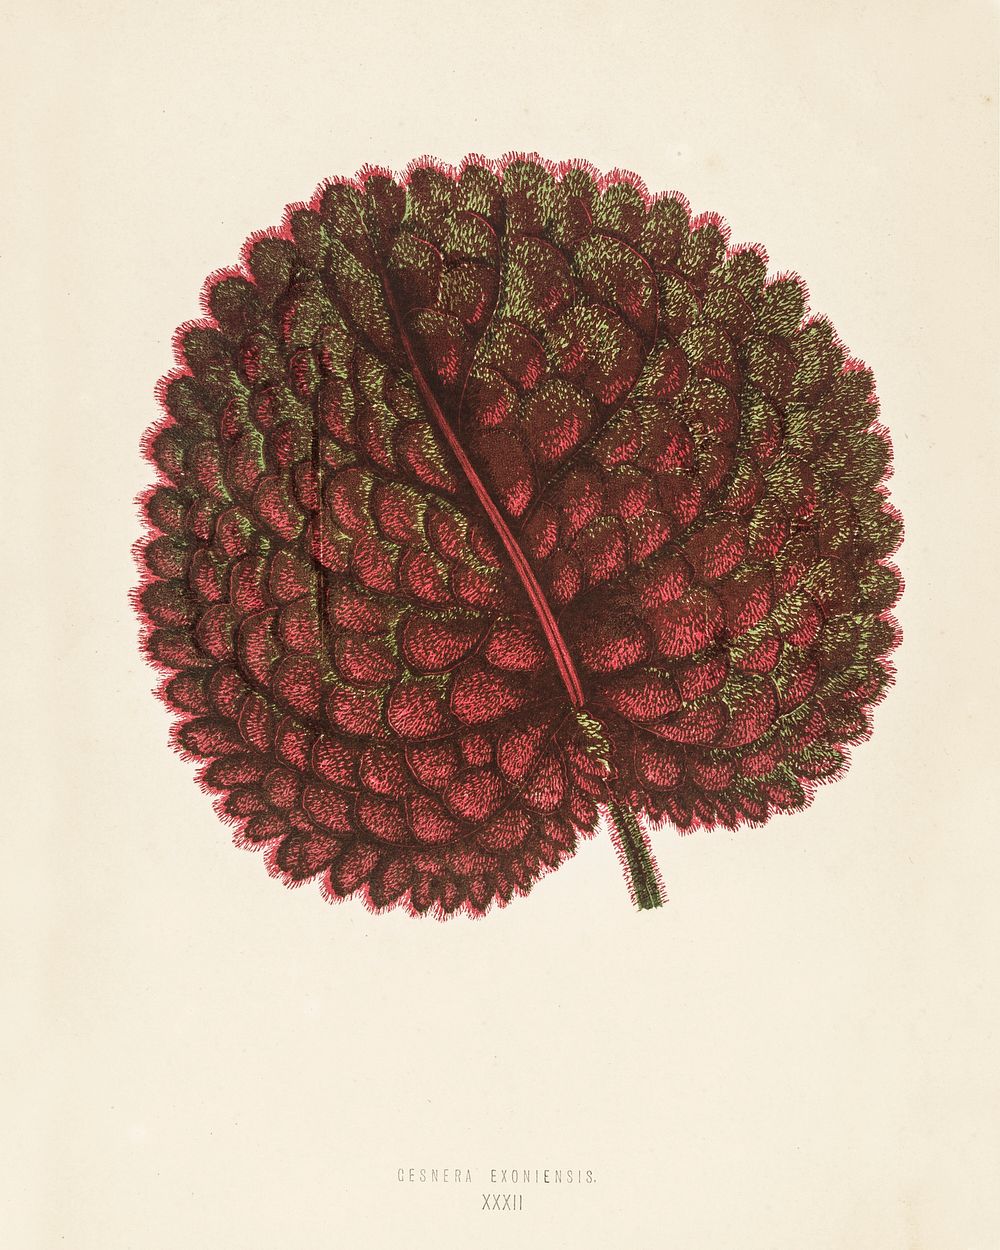 Gesnera exoniensis. Digitally enhanced from our own 1929 edition of New and Rare Beautiful-Leaved Plants by Benjamin Fawcett…